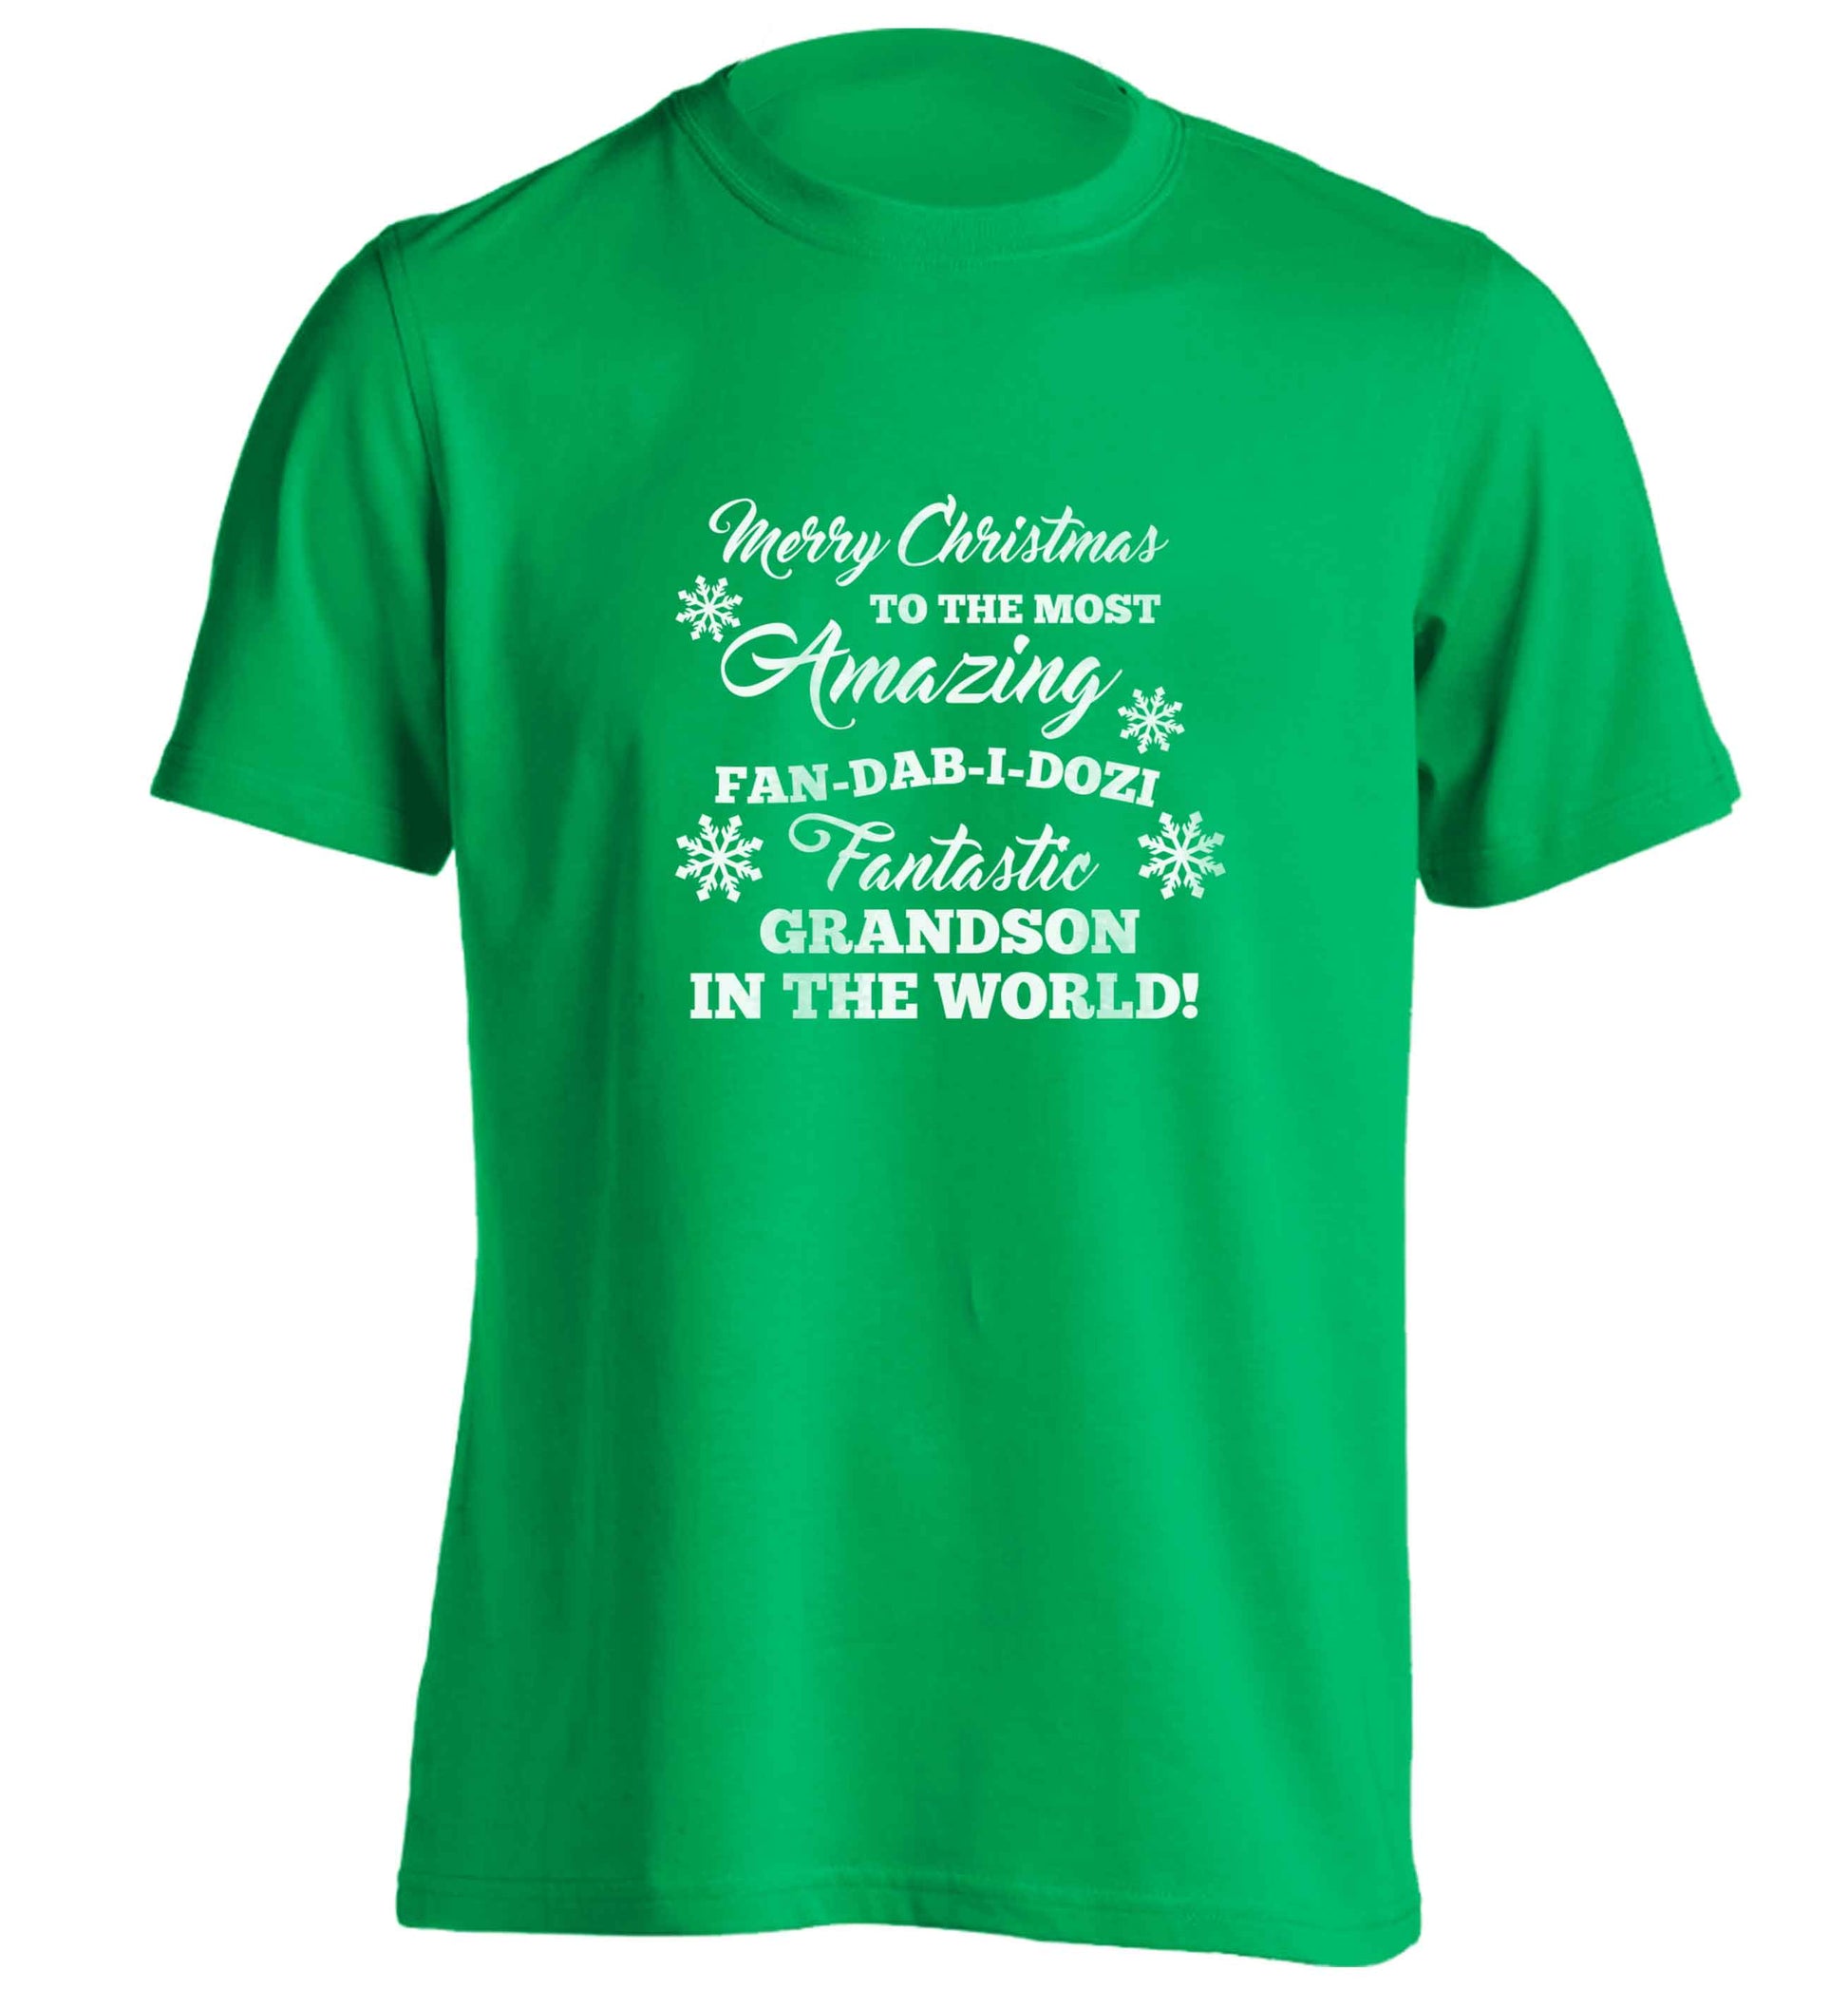 Merry Christmas to the most amazing fan-dab-i-dozi fantasic Grandson in the world adults unisex green Tshirt 2XL